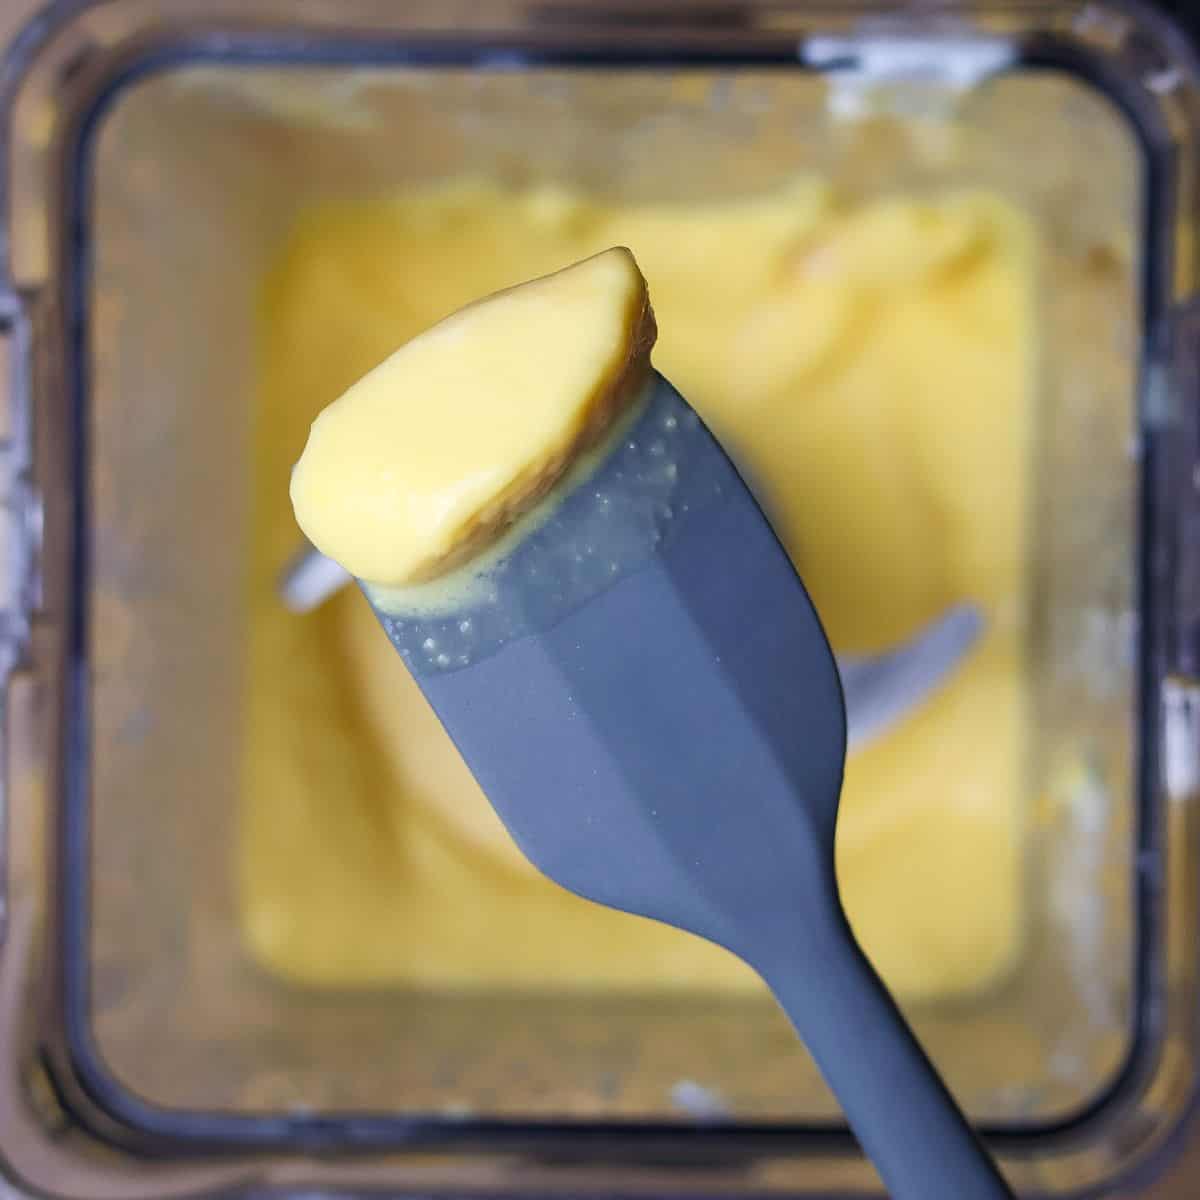 A spatula with a taste of mango smoothie indicating a taste test before adjusting flavors.